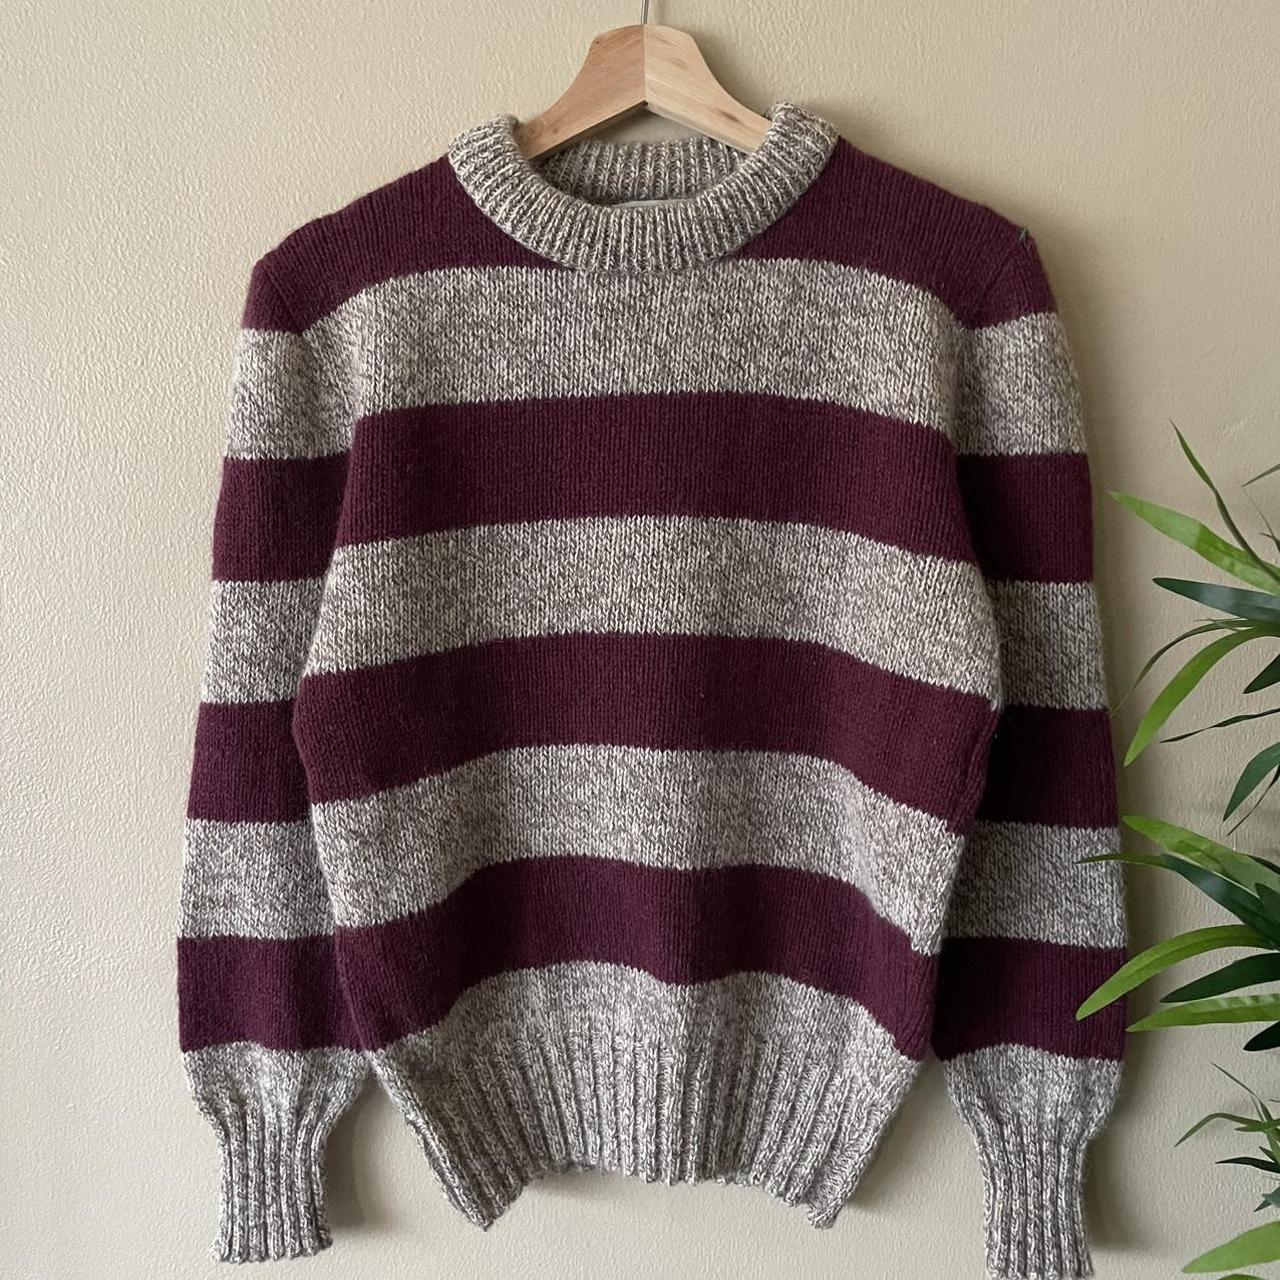 Vintage American Eagle outfitters knit... - Depop